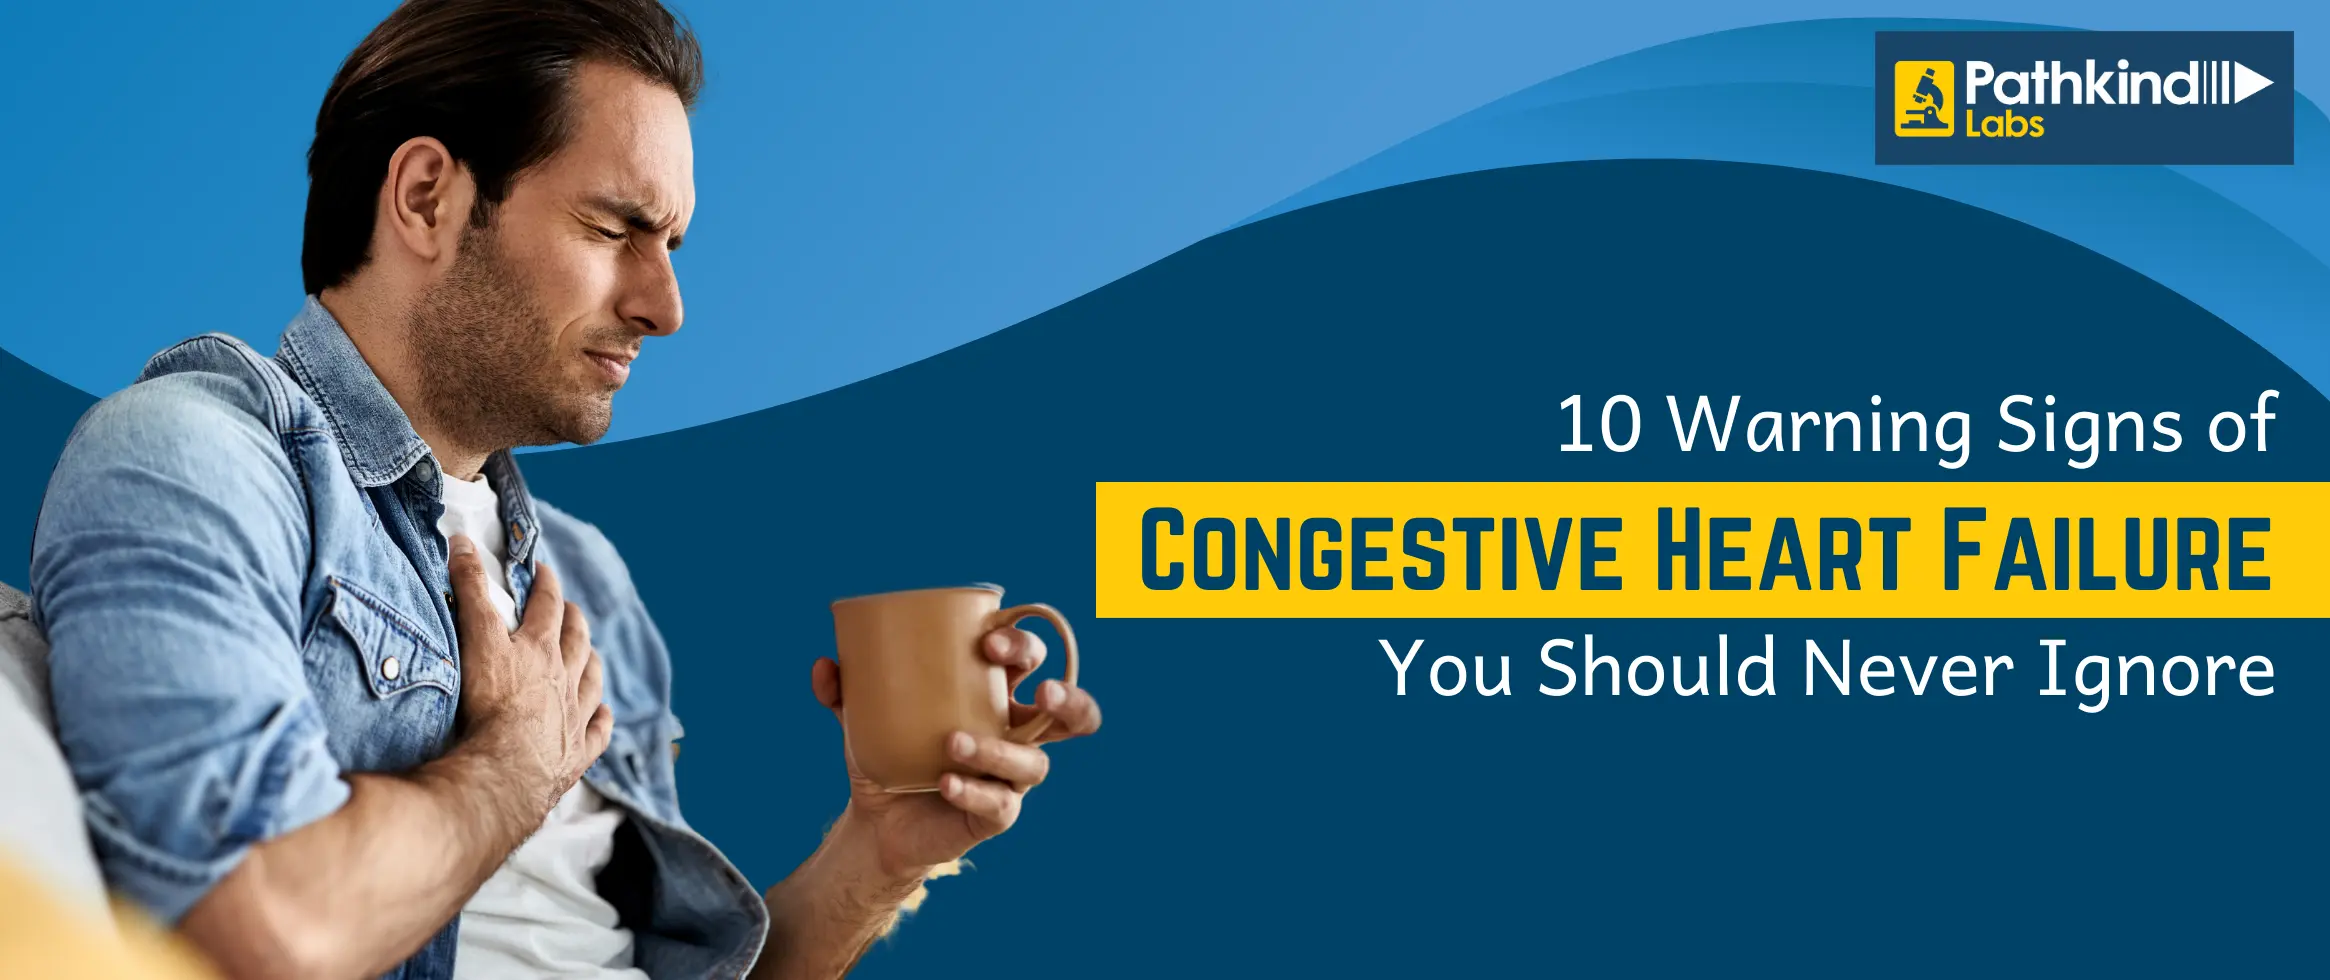  10 Warning Signs of Congestive Heart Failure You Should Never Ignore